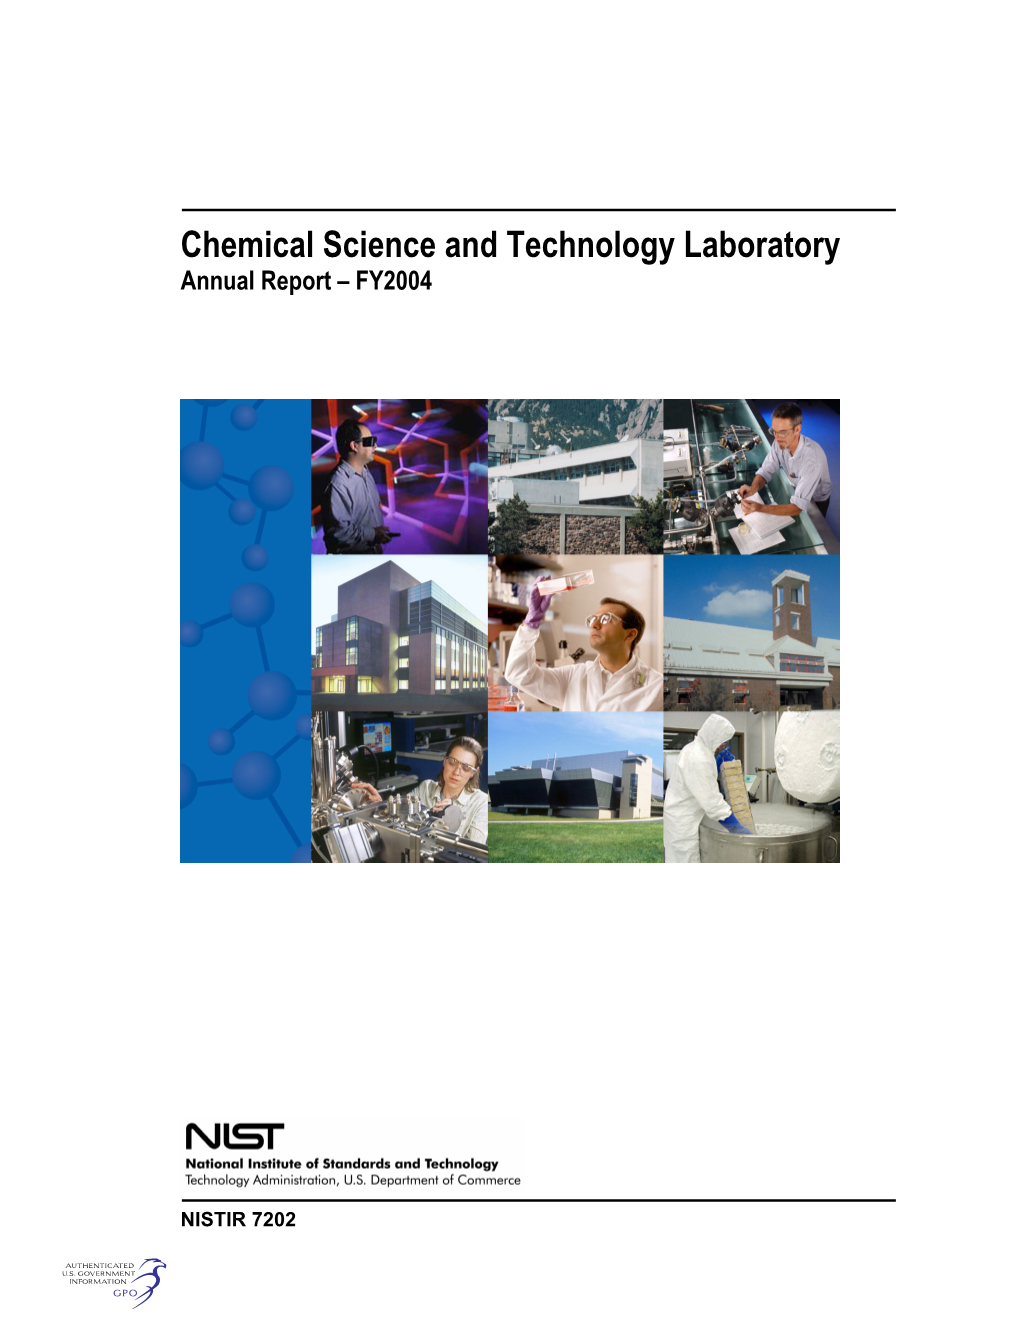 Chemical Science and Technology Laboratory Annual Report – FY2004